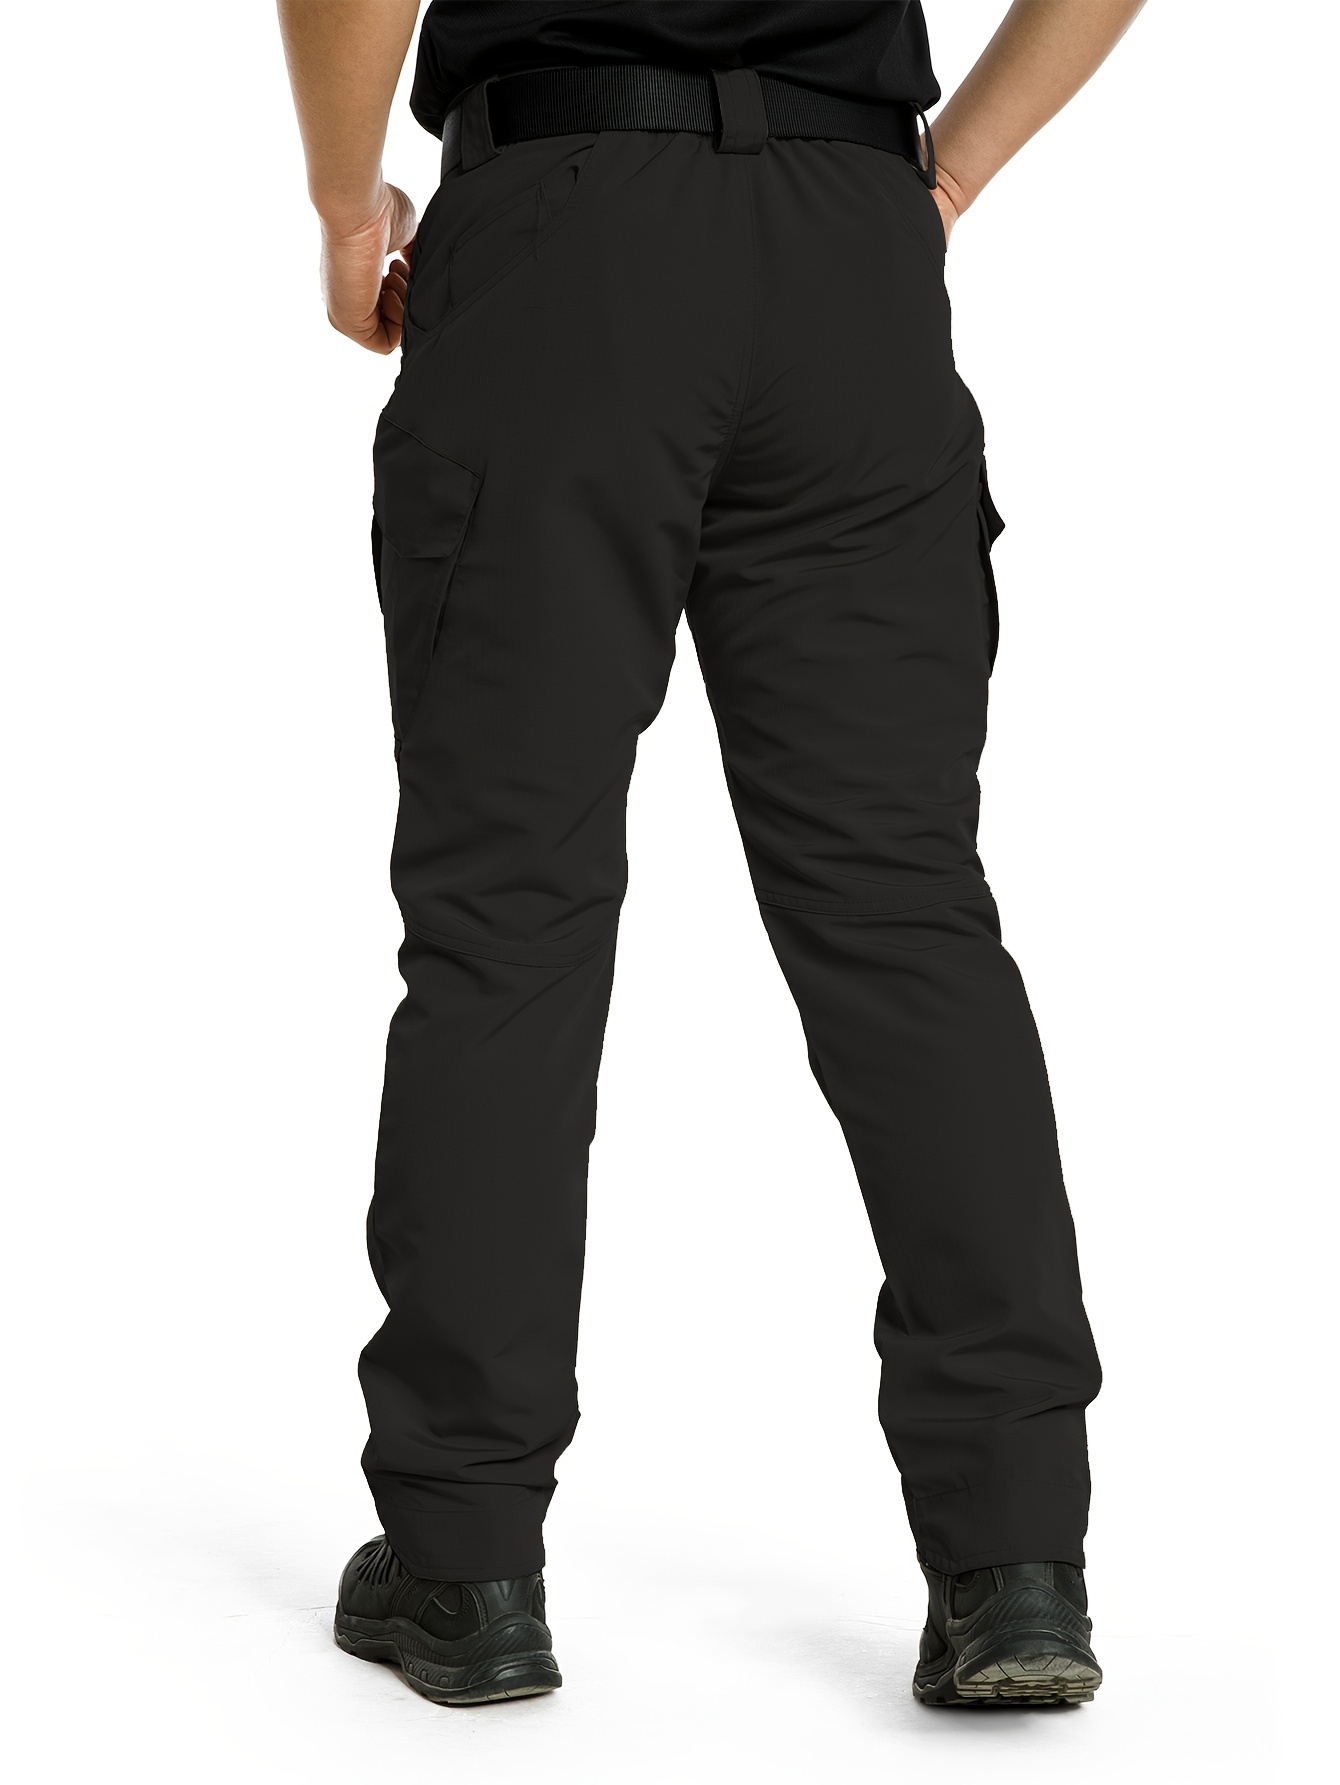 Overalls Trousers, Tactical Pant, Cargo Pants